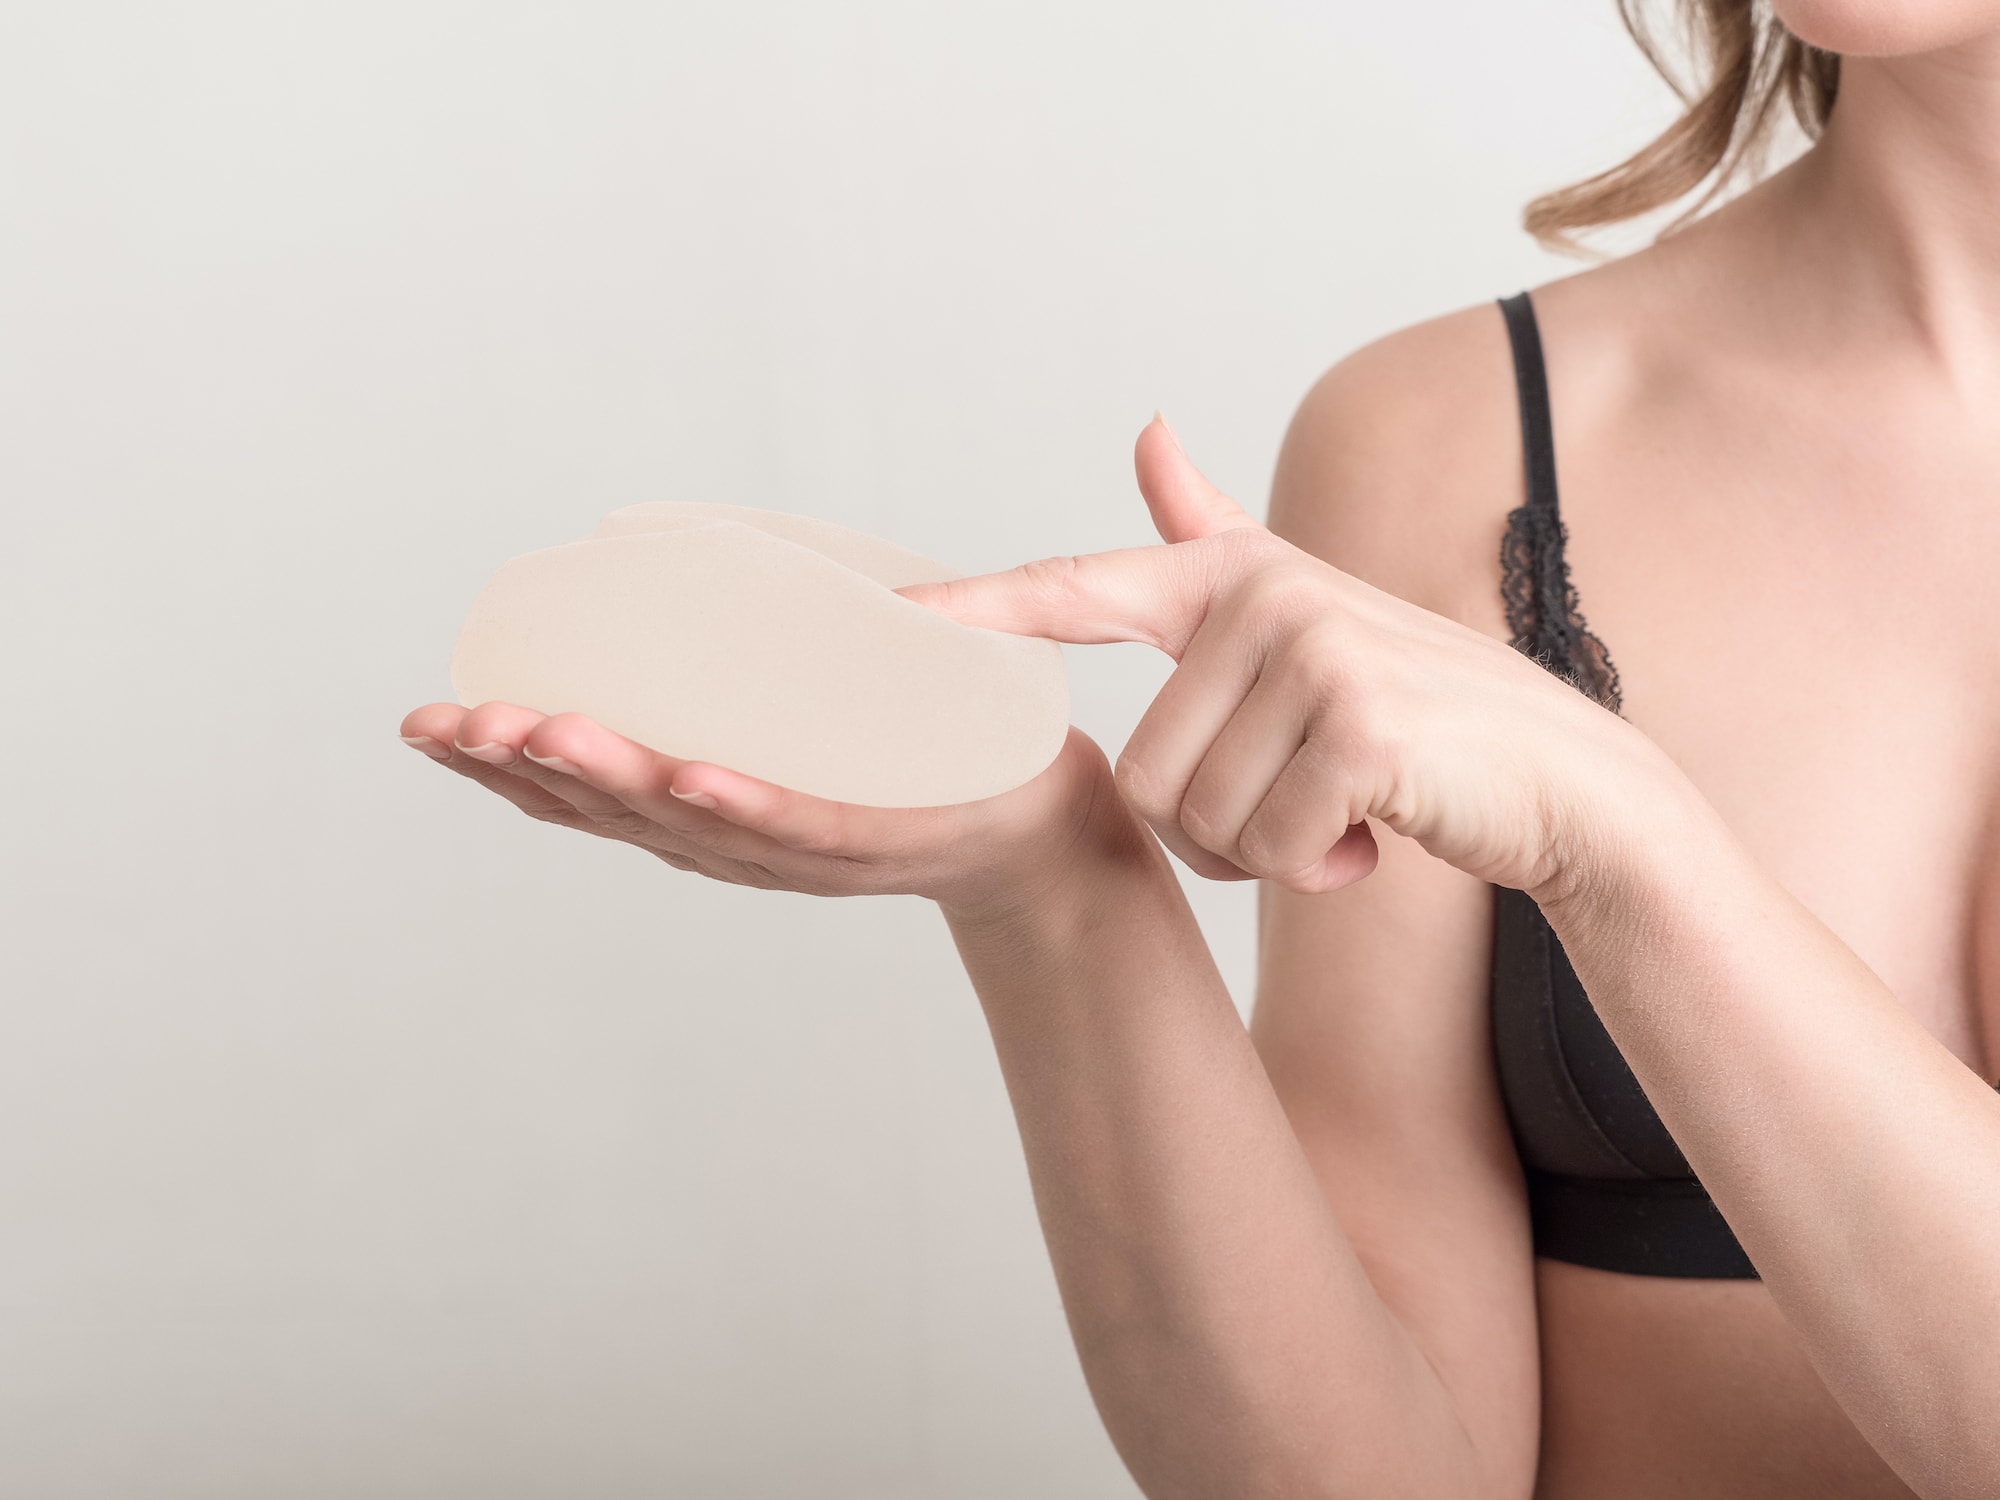 Woman holding a breast implant and feeling it in her hands